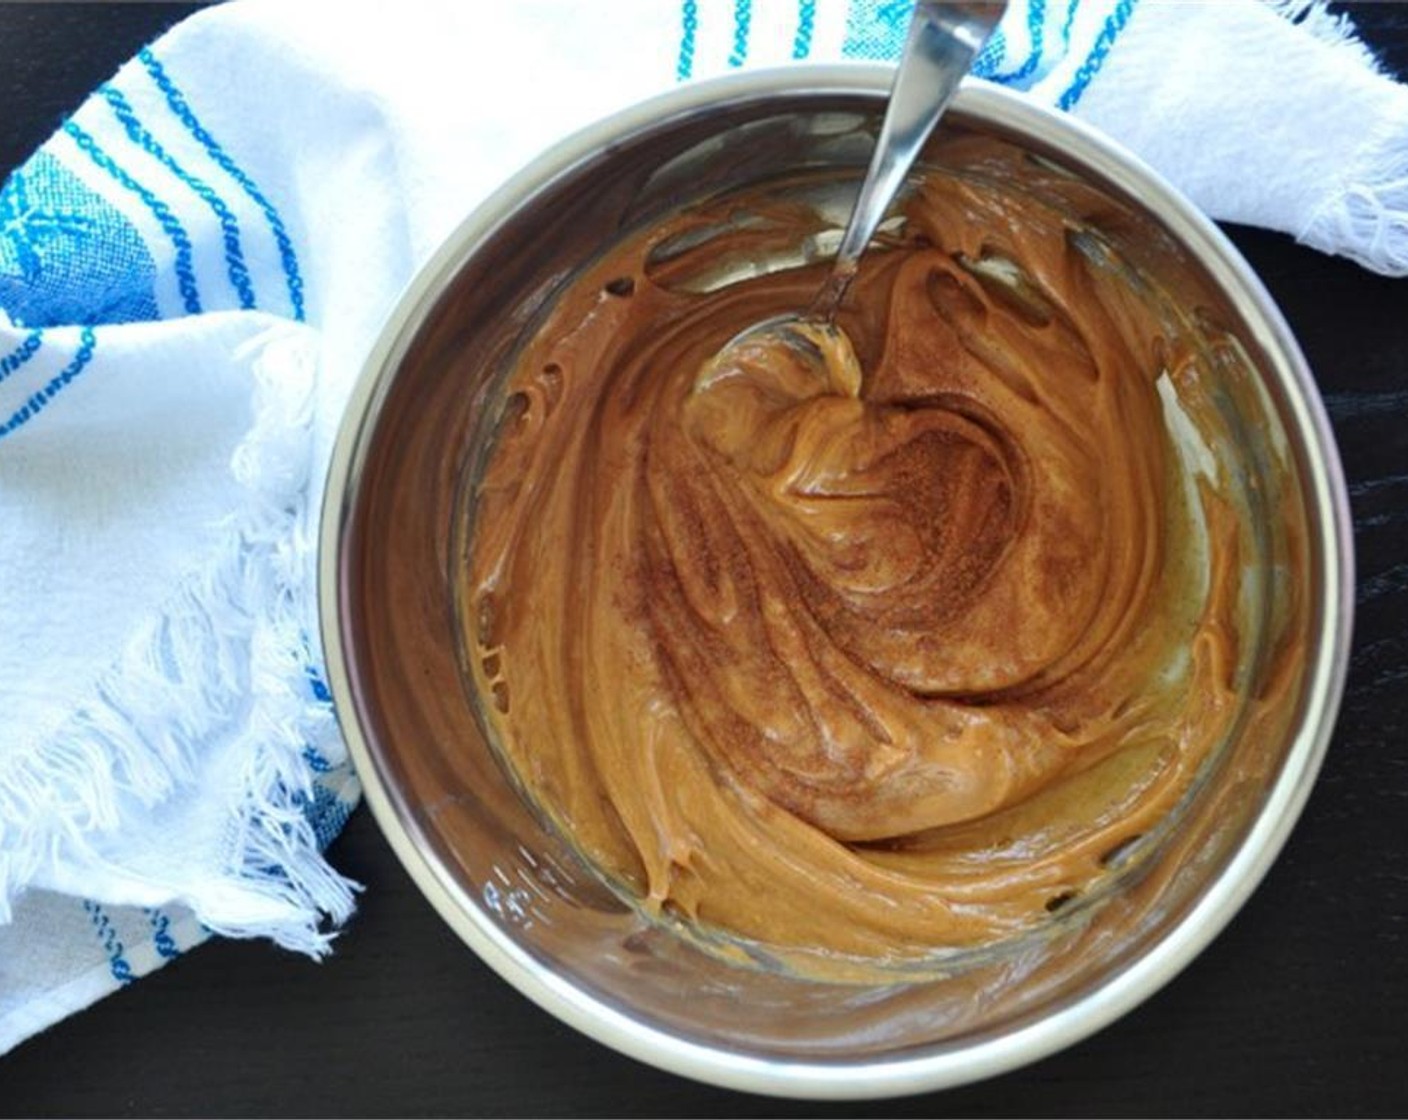 step 1 In a mixing bowl, stir together Corn Syrup (1/2 cup), Peanut Butter (1/2 cup), and Ground Cinnamon (1/2 tsp).